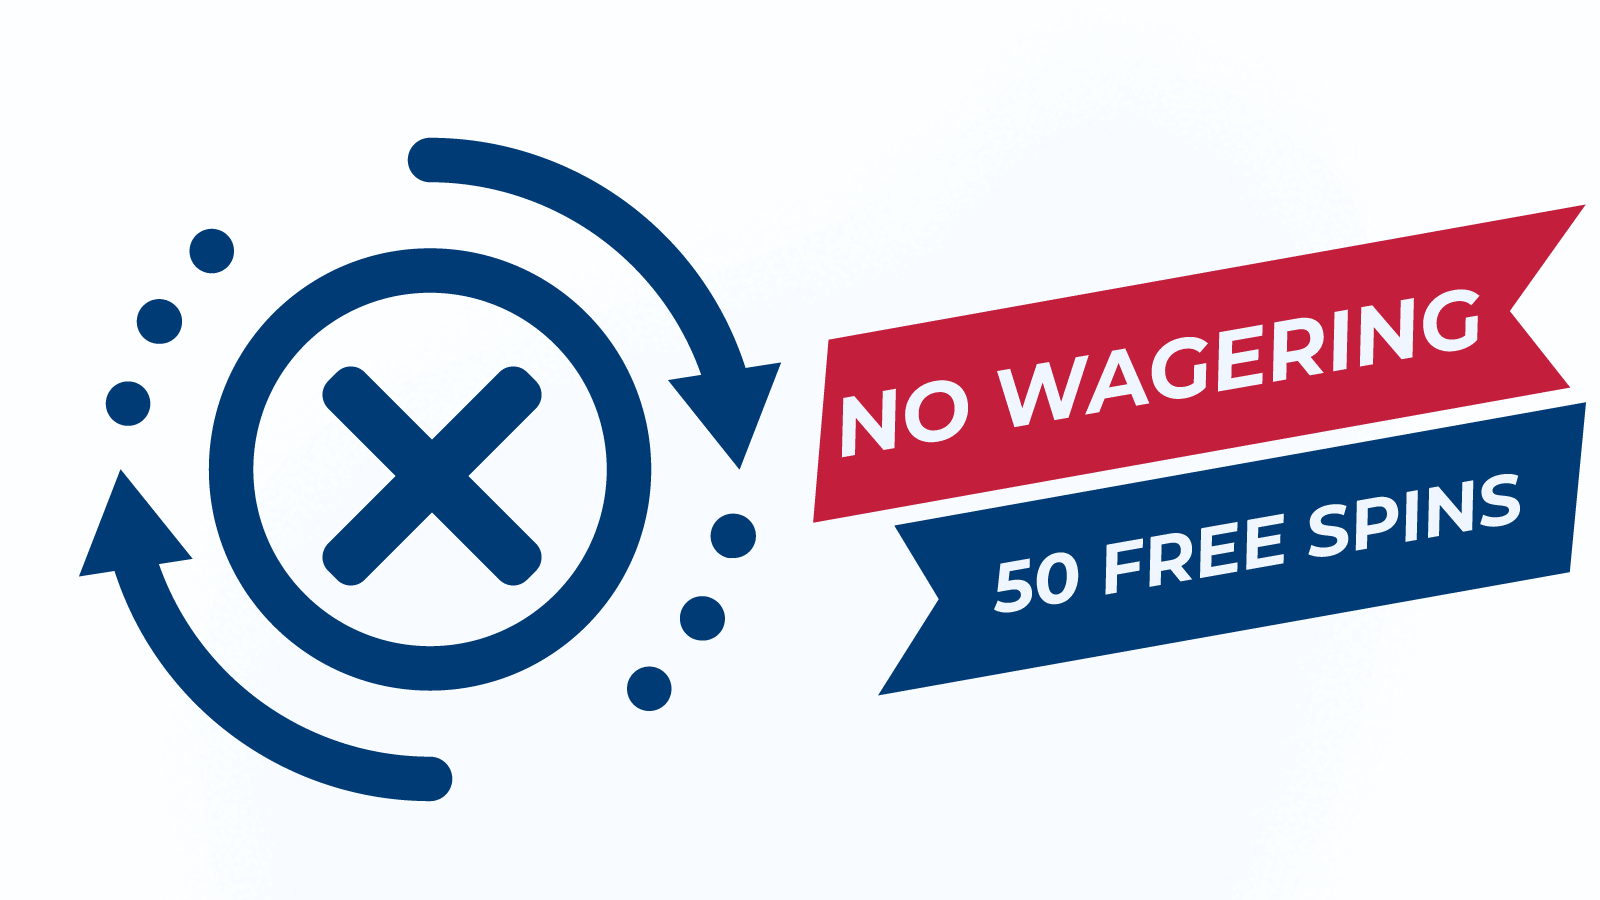 No Wagering 50 Free Spins